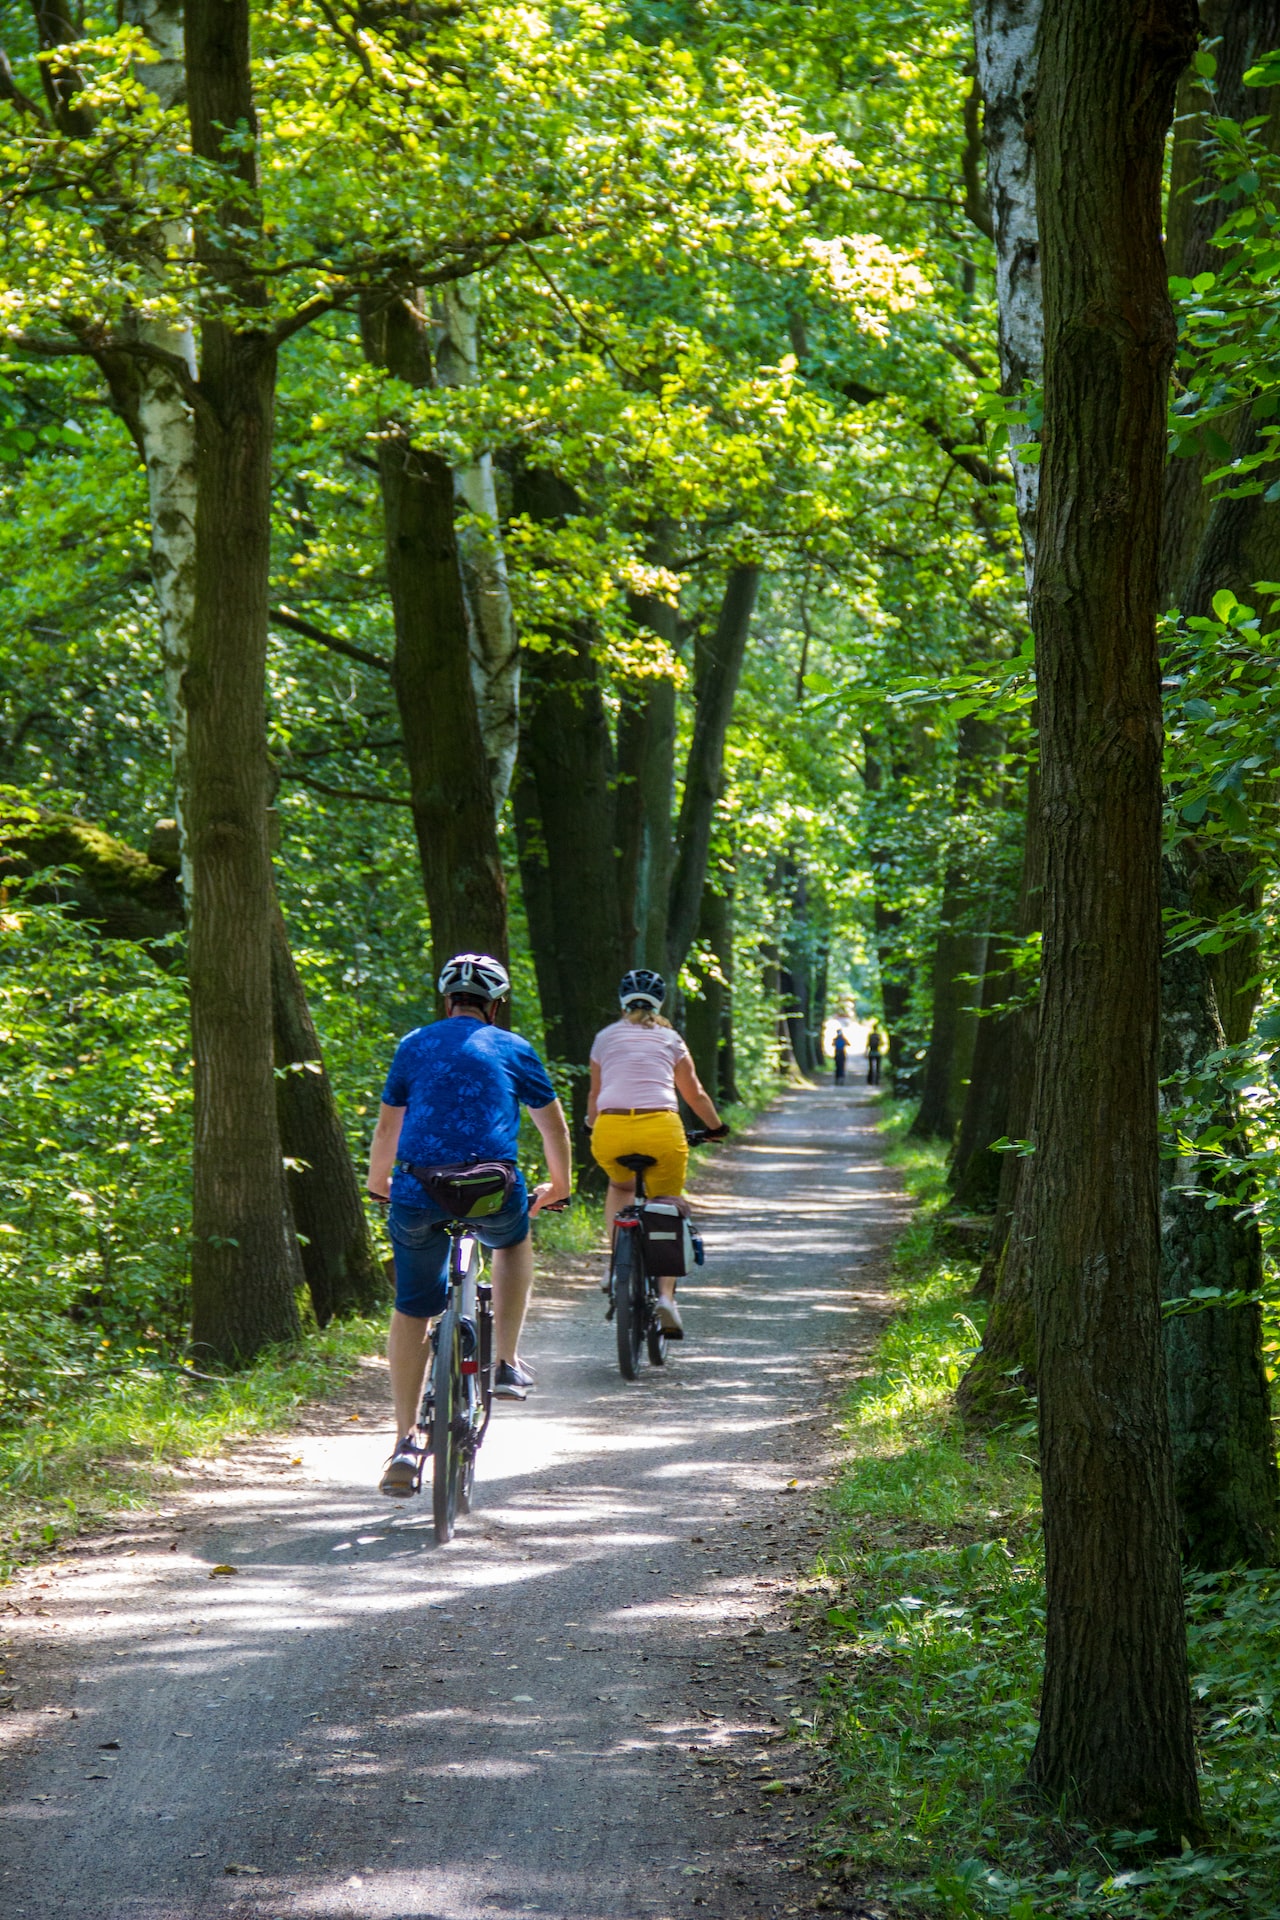 people riding bicycle on road between green trees during daytime